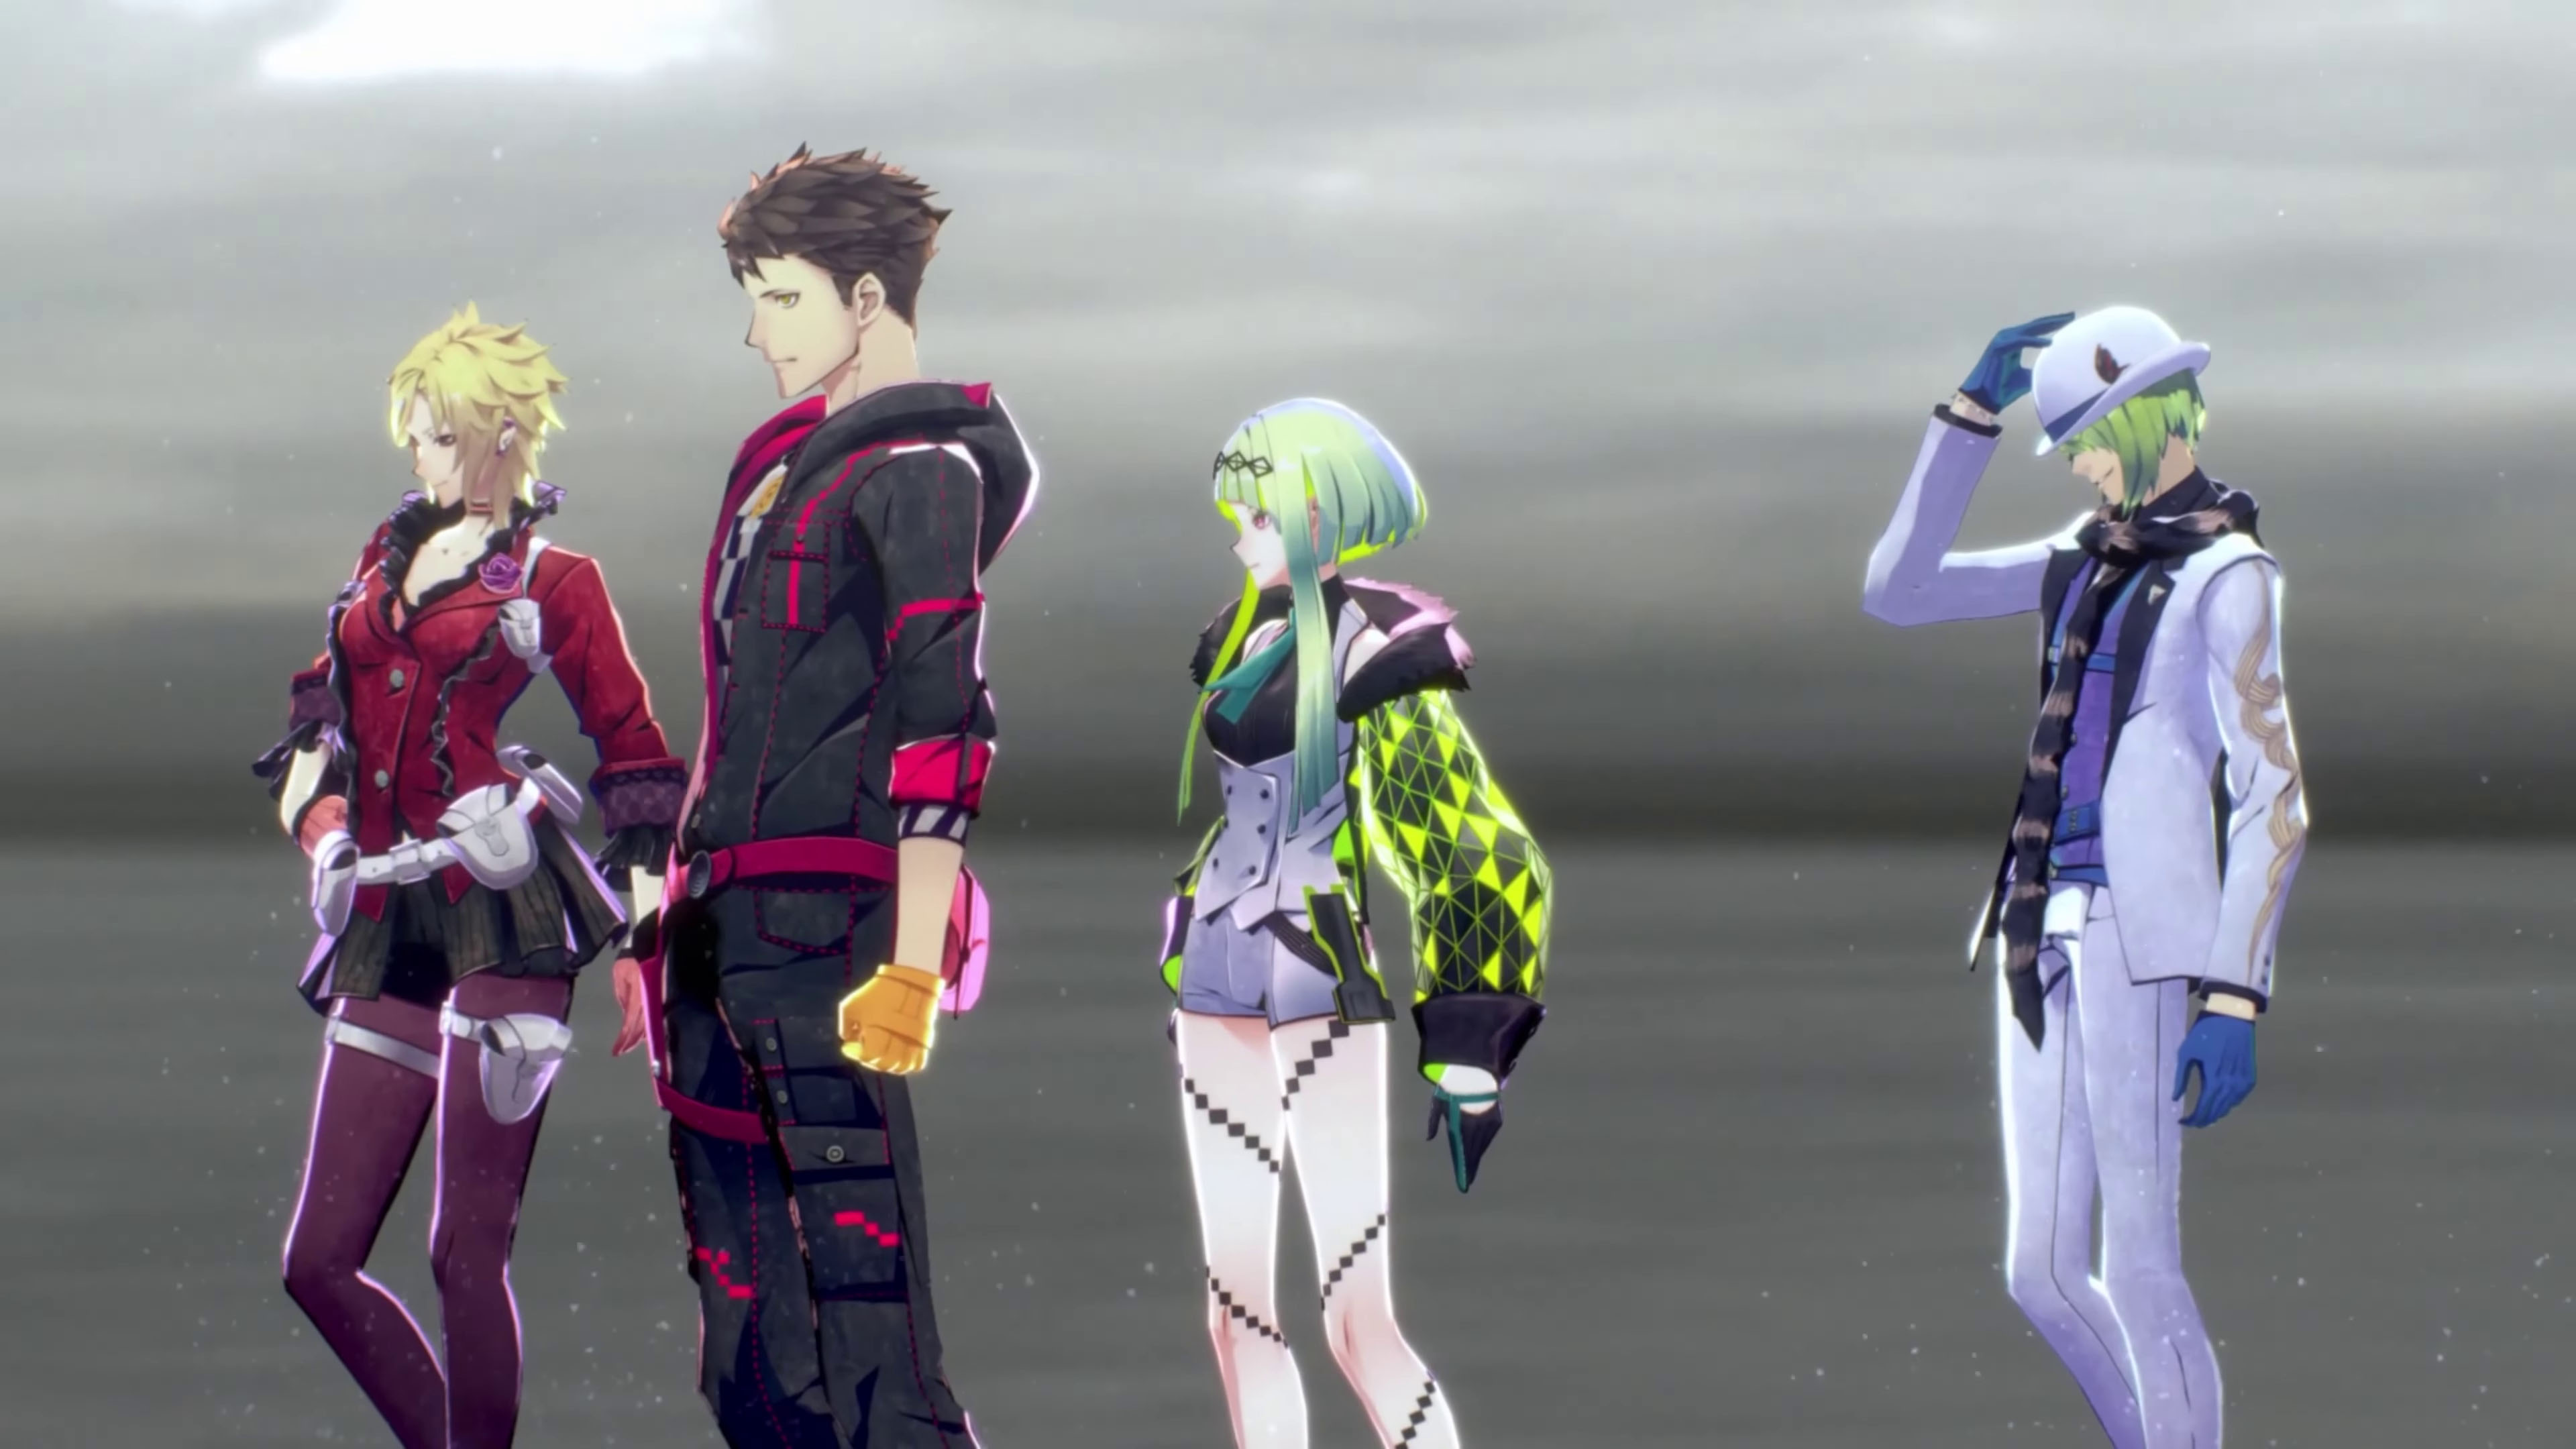 The English cast of Soul Hackers 2 has been revealed.